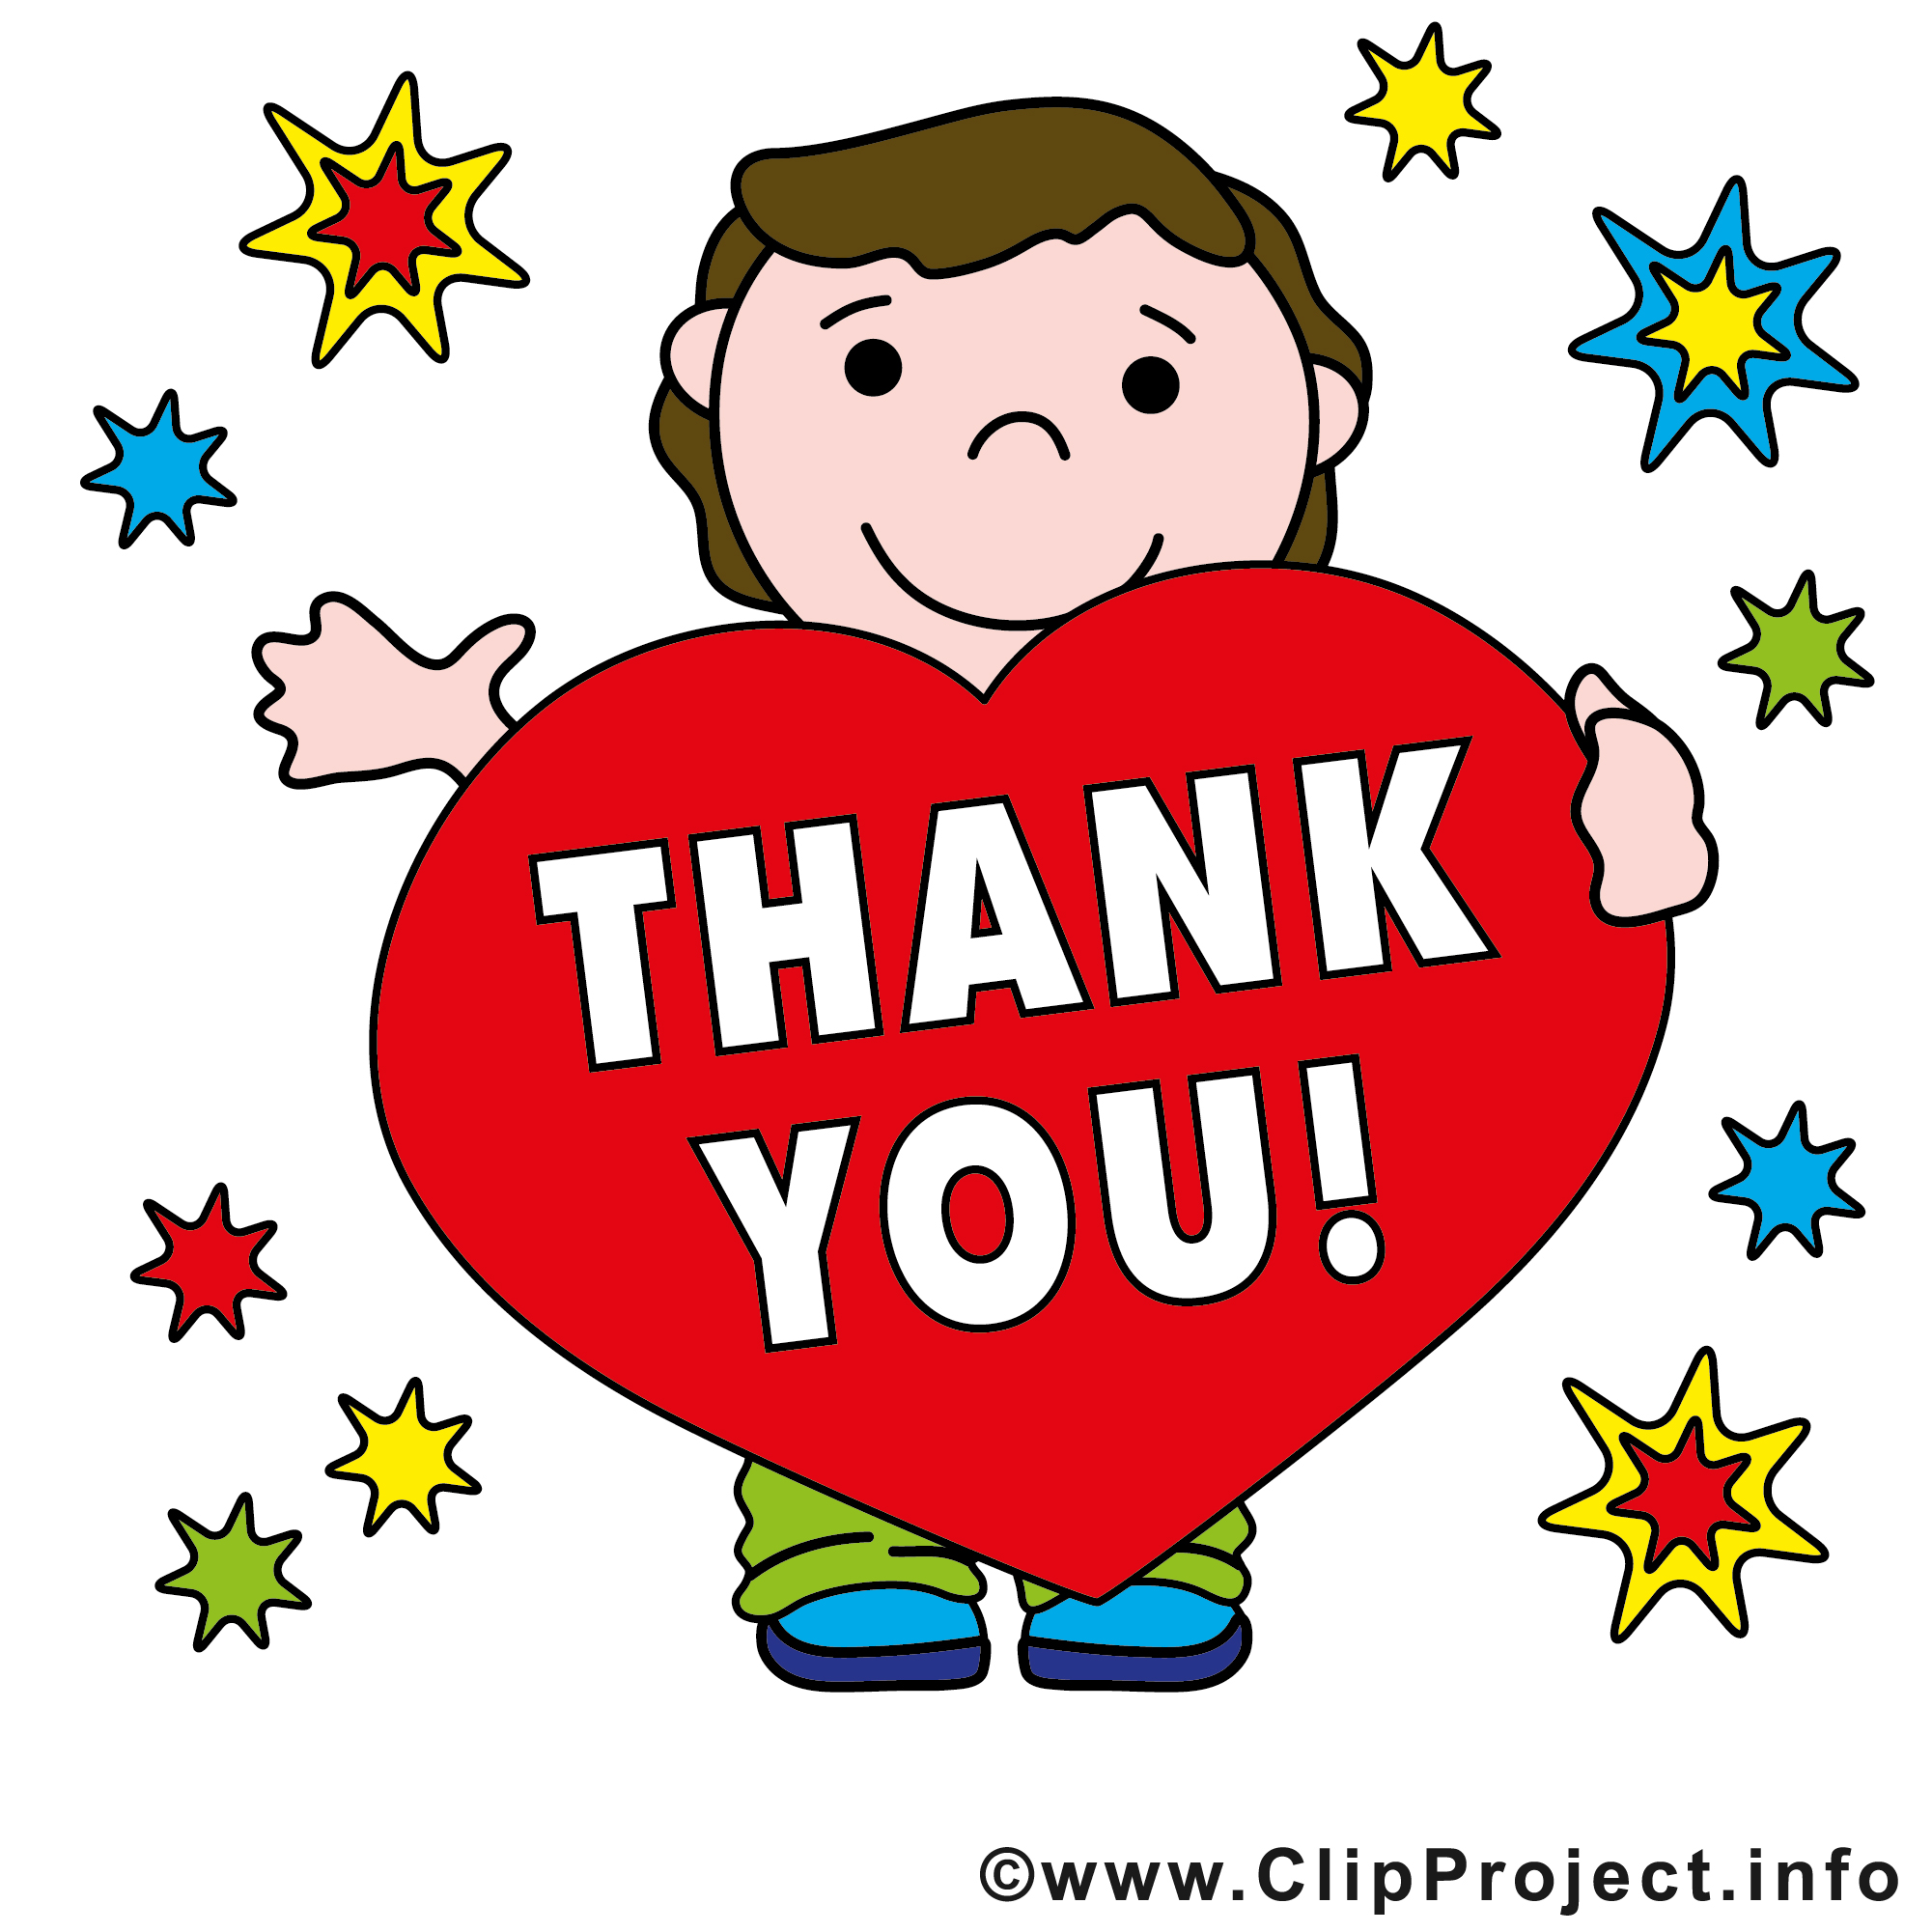 thank you images - Clipart Of Thank You